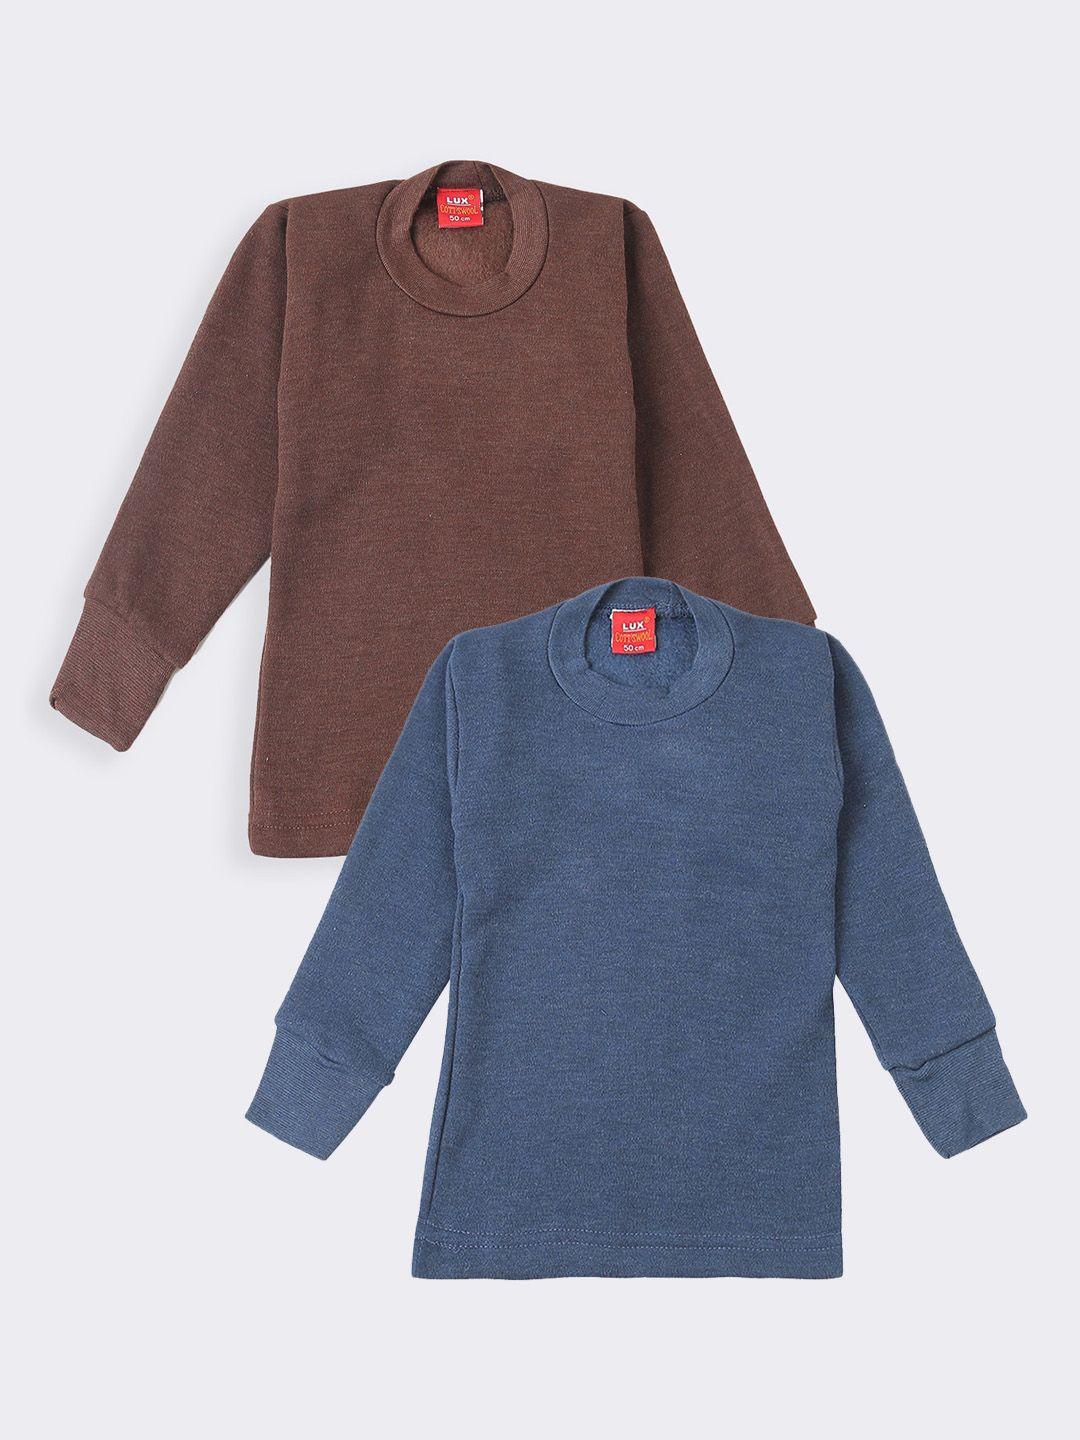 lux cottswool boys pack of 2 brown & blue solid cotton thermal tops